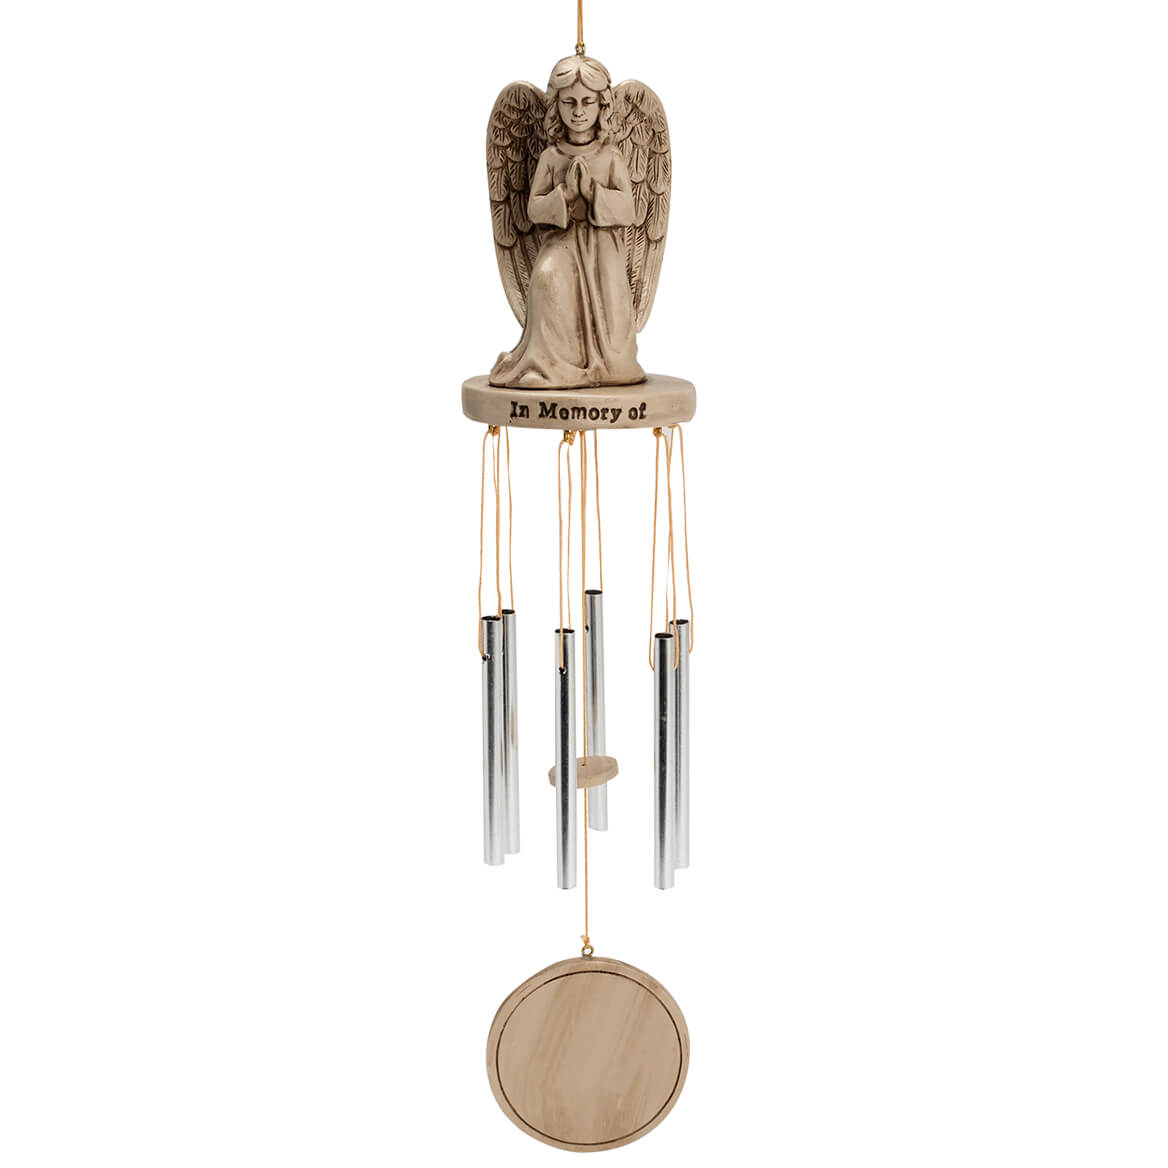 Fox Valley Traders Memorial Wind Chime by Fox River CreationsTM